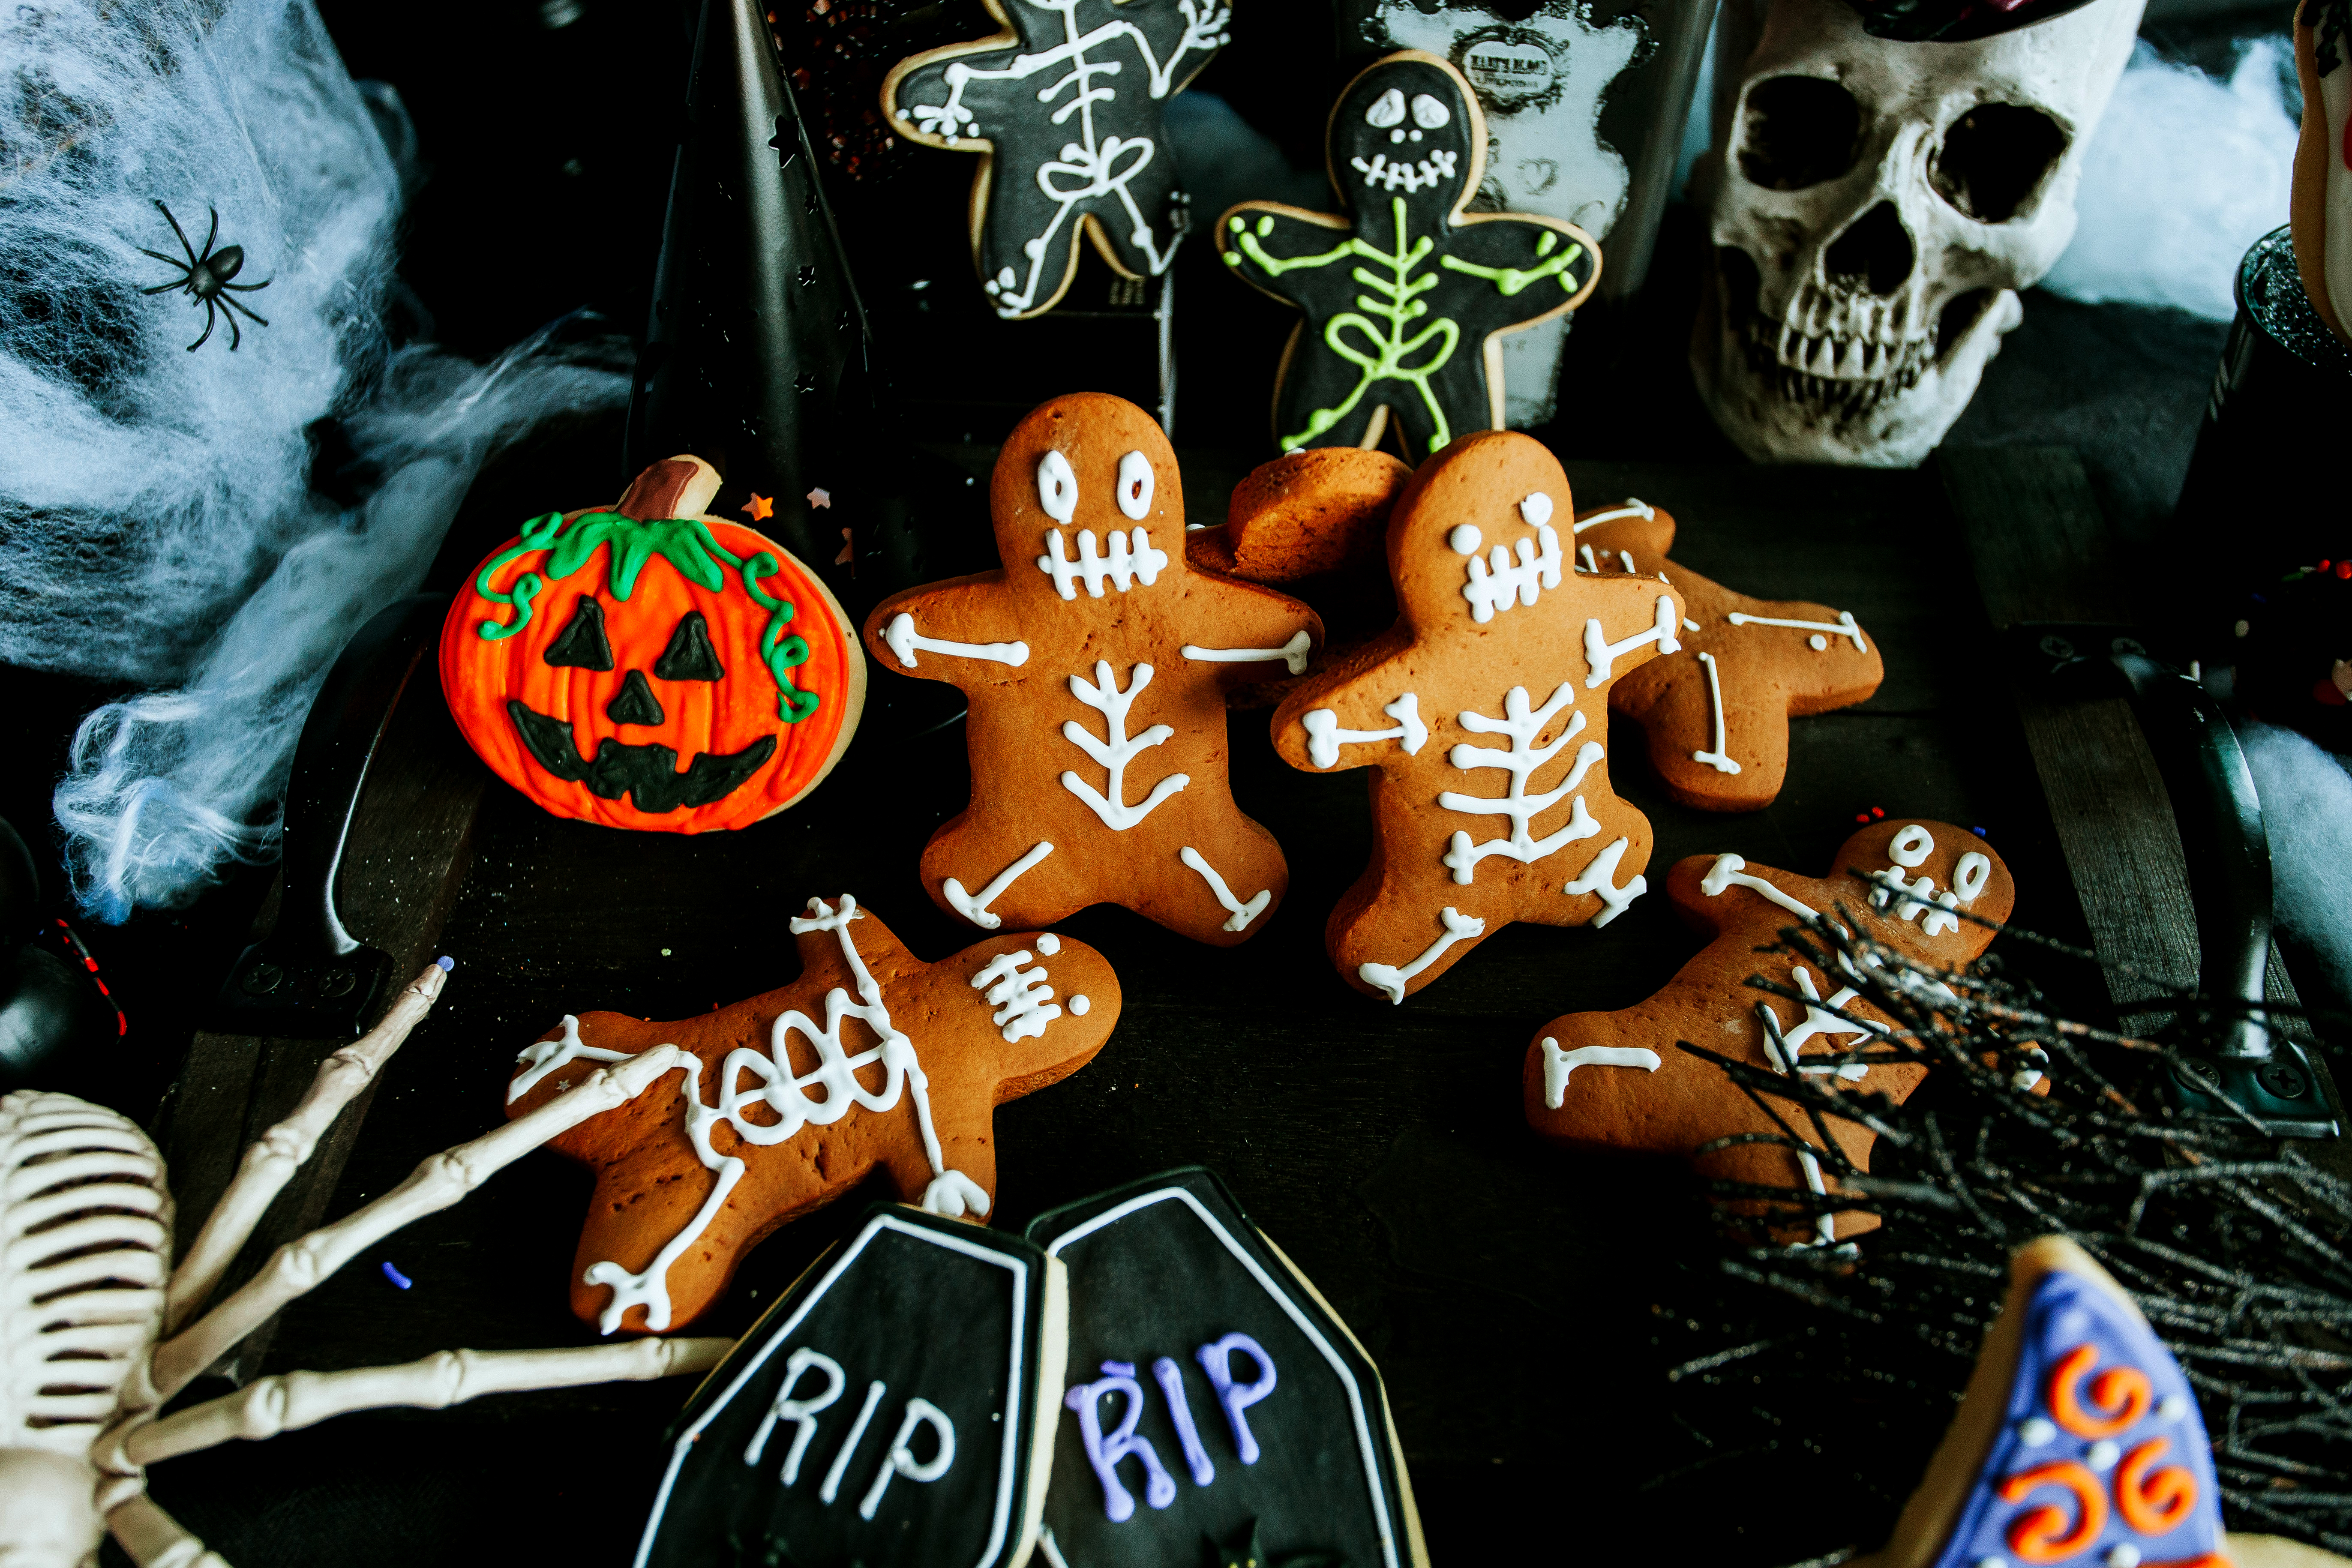 Dessert Gallery gingerbread cookies decorated like skeletons and butter cookies painted like tombstones and pumpkin.